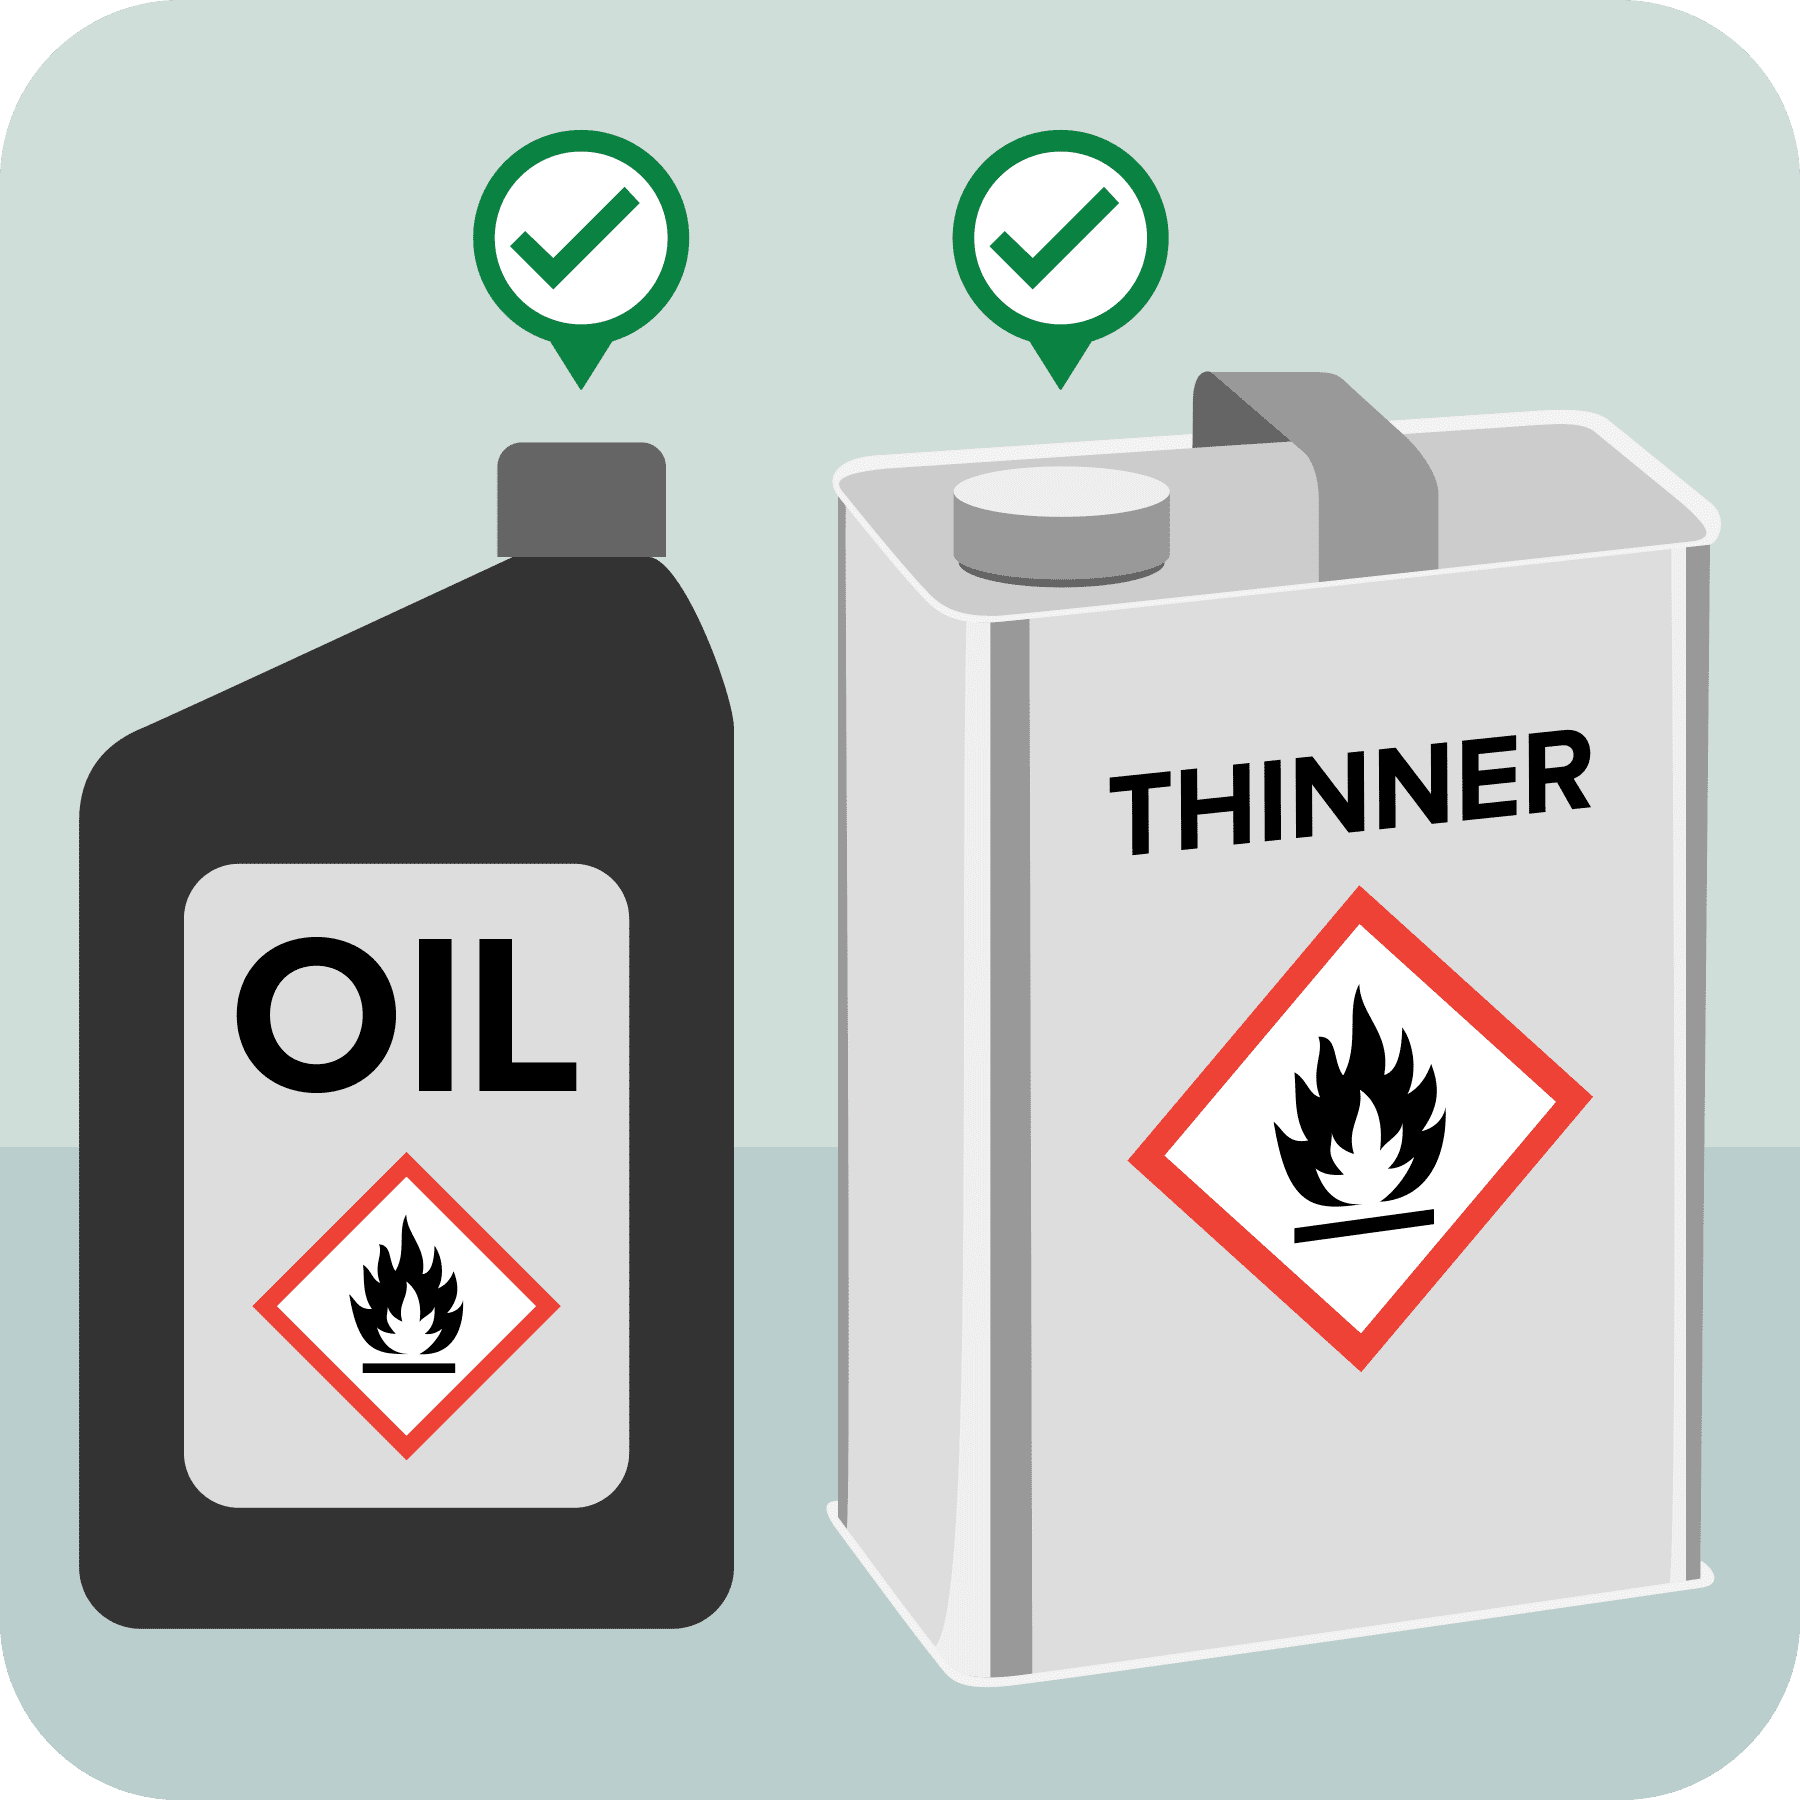 Sealed containers of oil and paint thinner with green checkmarks above each.